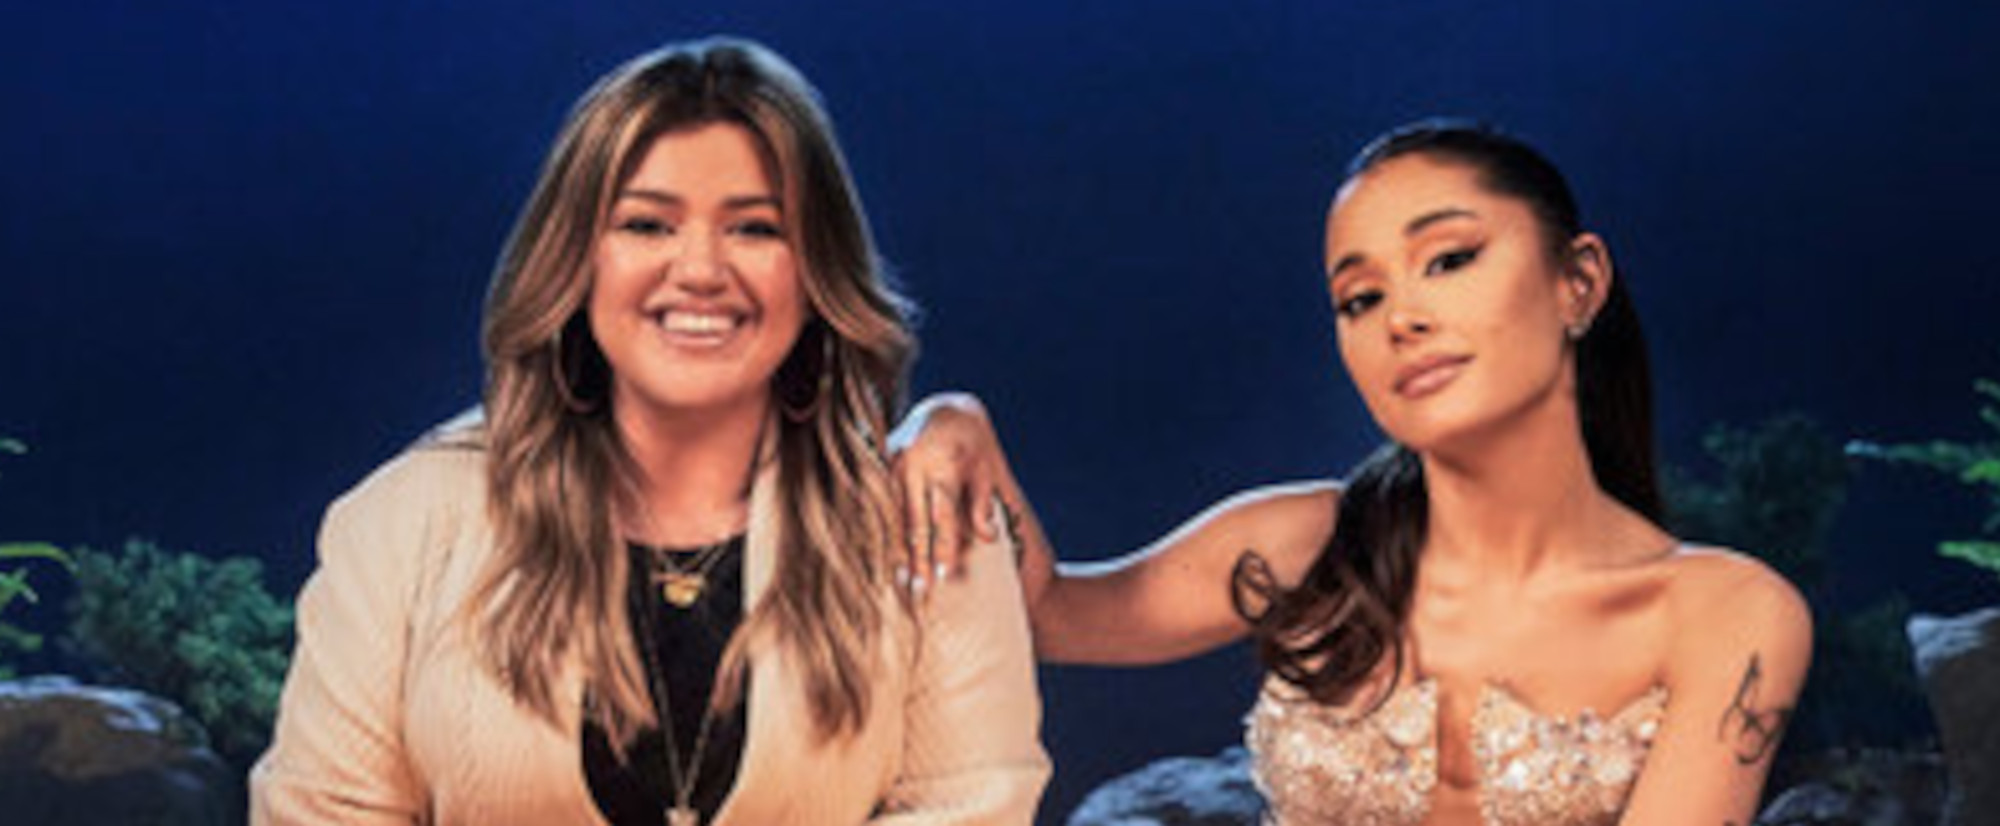 Kelly Clarkson and Ariana Grande Face-Off in Singing Battle on New Jimmy Fallon-Hosted Show